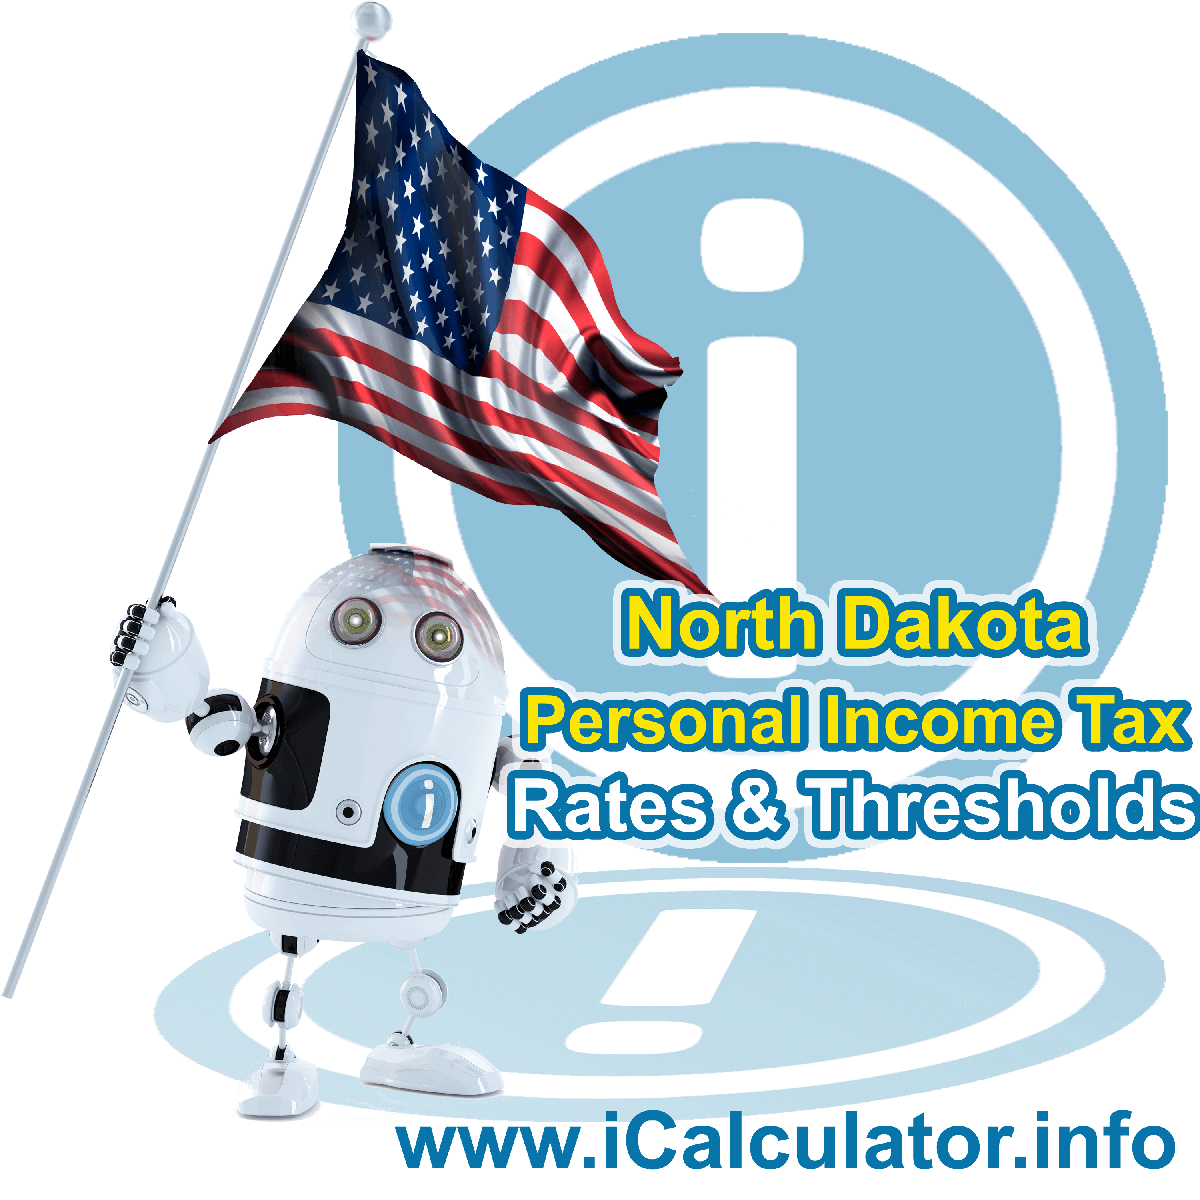 North Dakota State Tax Tables 2013. This image displays details of the North Dakota State Tax Tables for the 2013 tax return year which is provided in support of the 2013 US Tax Calculator